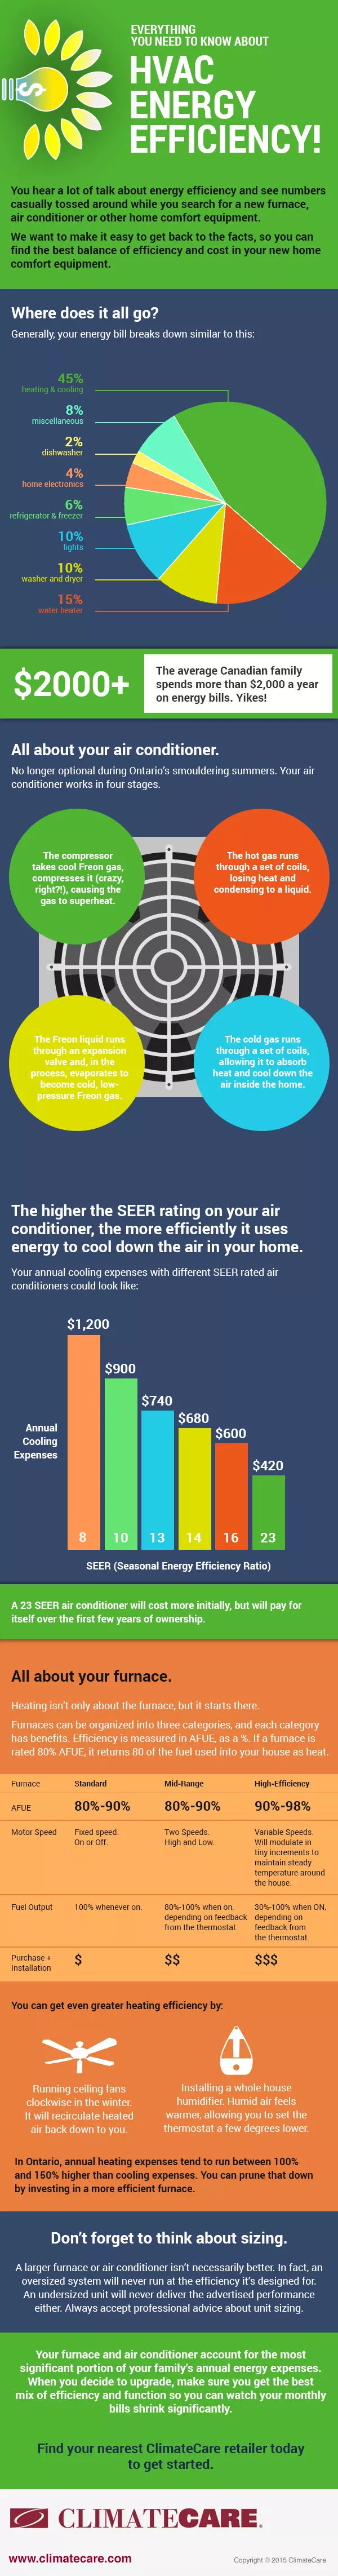 detailed infographic about hvac, furance and Air conditioner energy efficiency ratings 